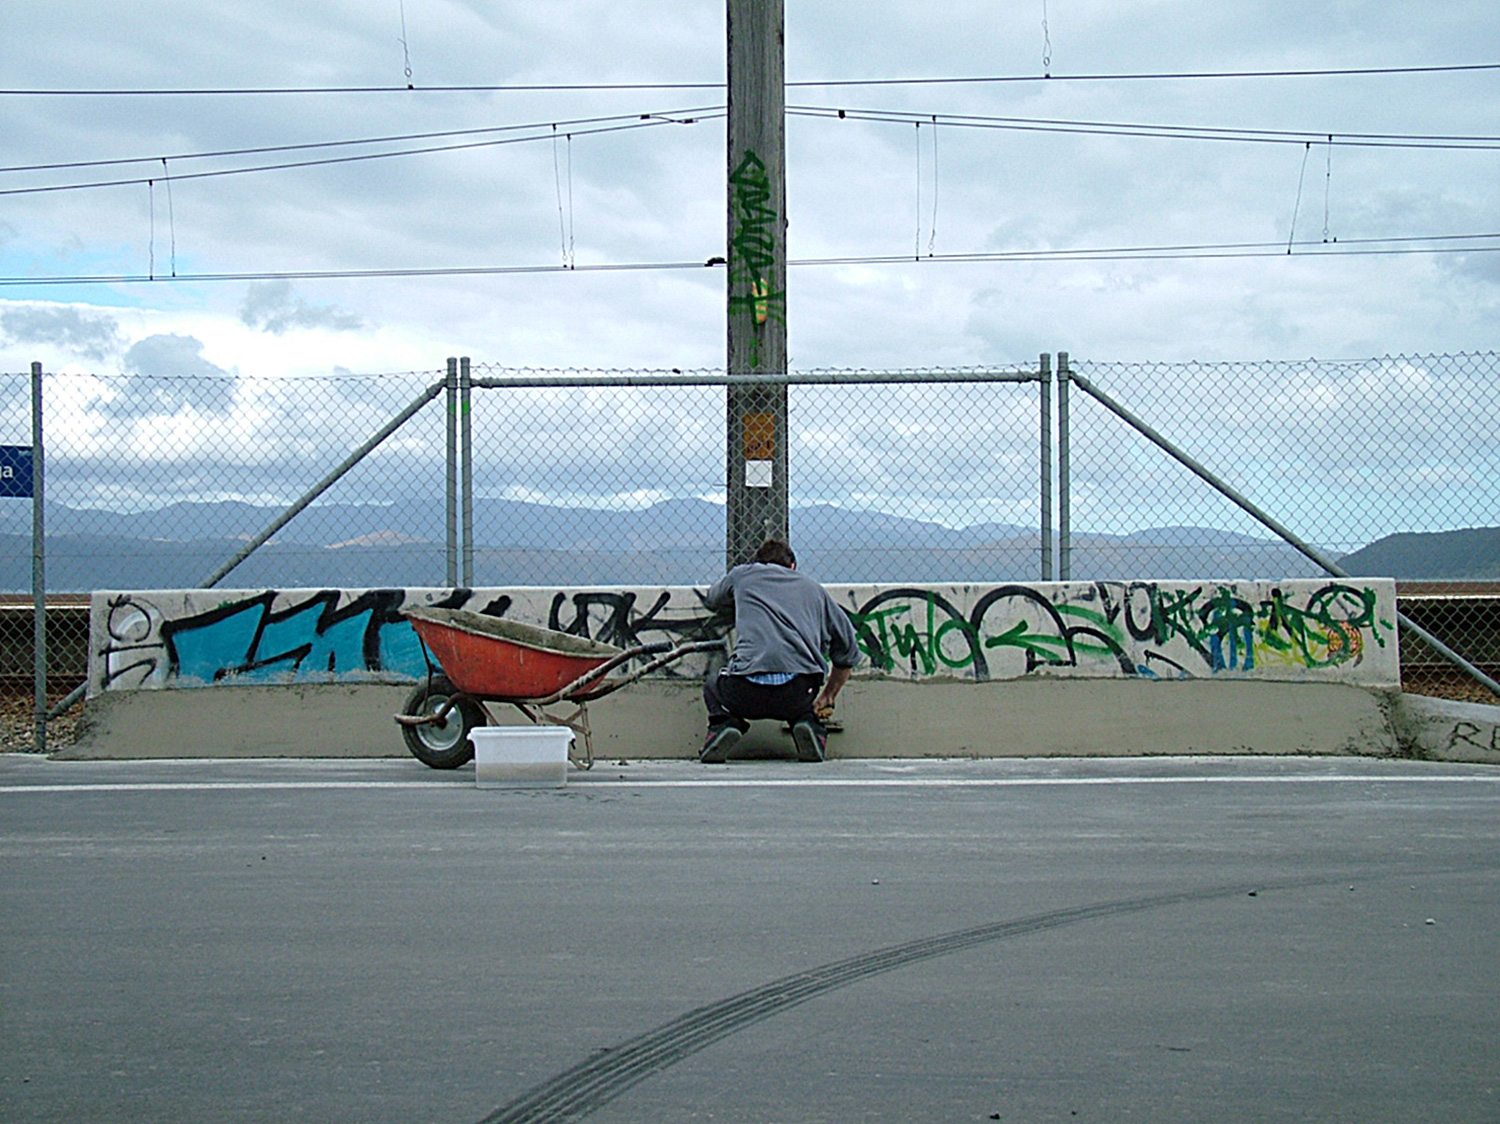 A worker enhancing a road barrier for the purpose of skateboarding.